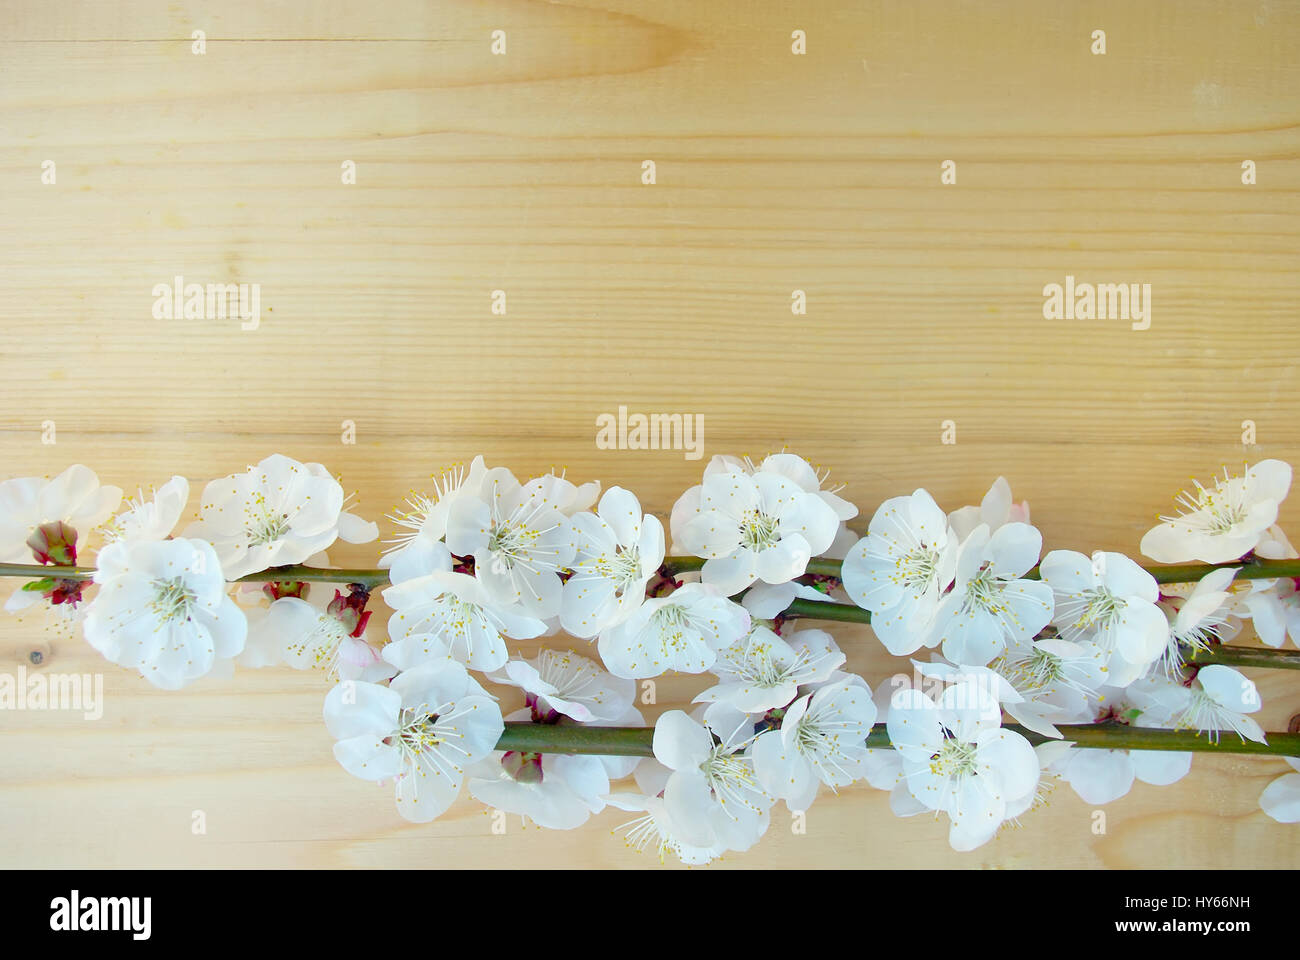 Seasonal blossoming springtime. Bloom closeup. Spring white blossom on wood texture background. April flower tree branch composition. Stock Photo